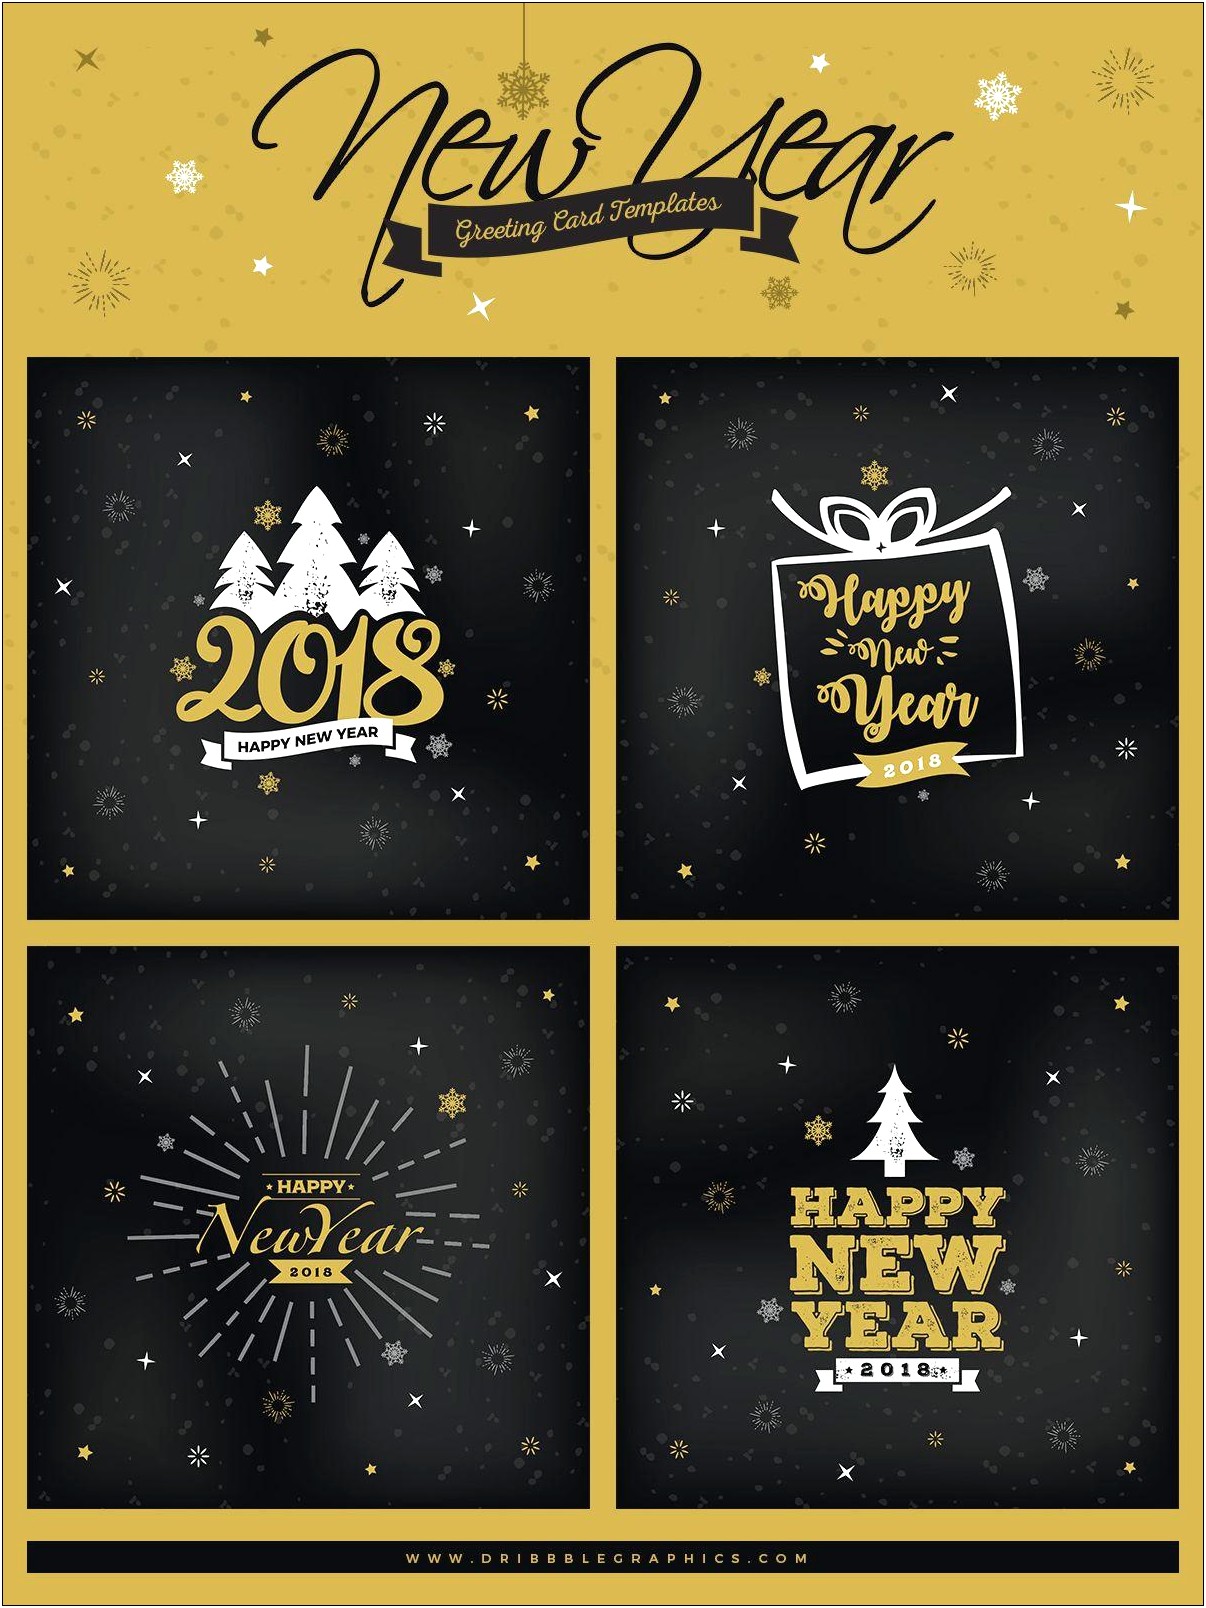 Free Greeting Card Templates For New Year